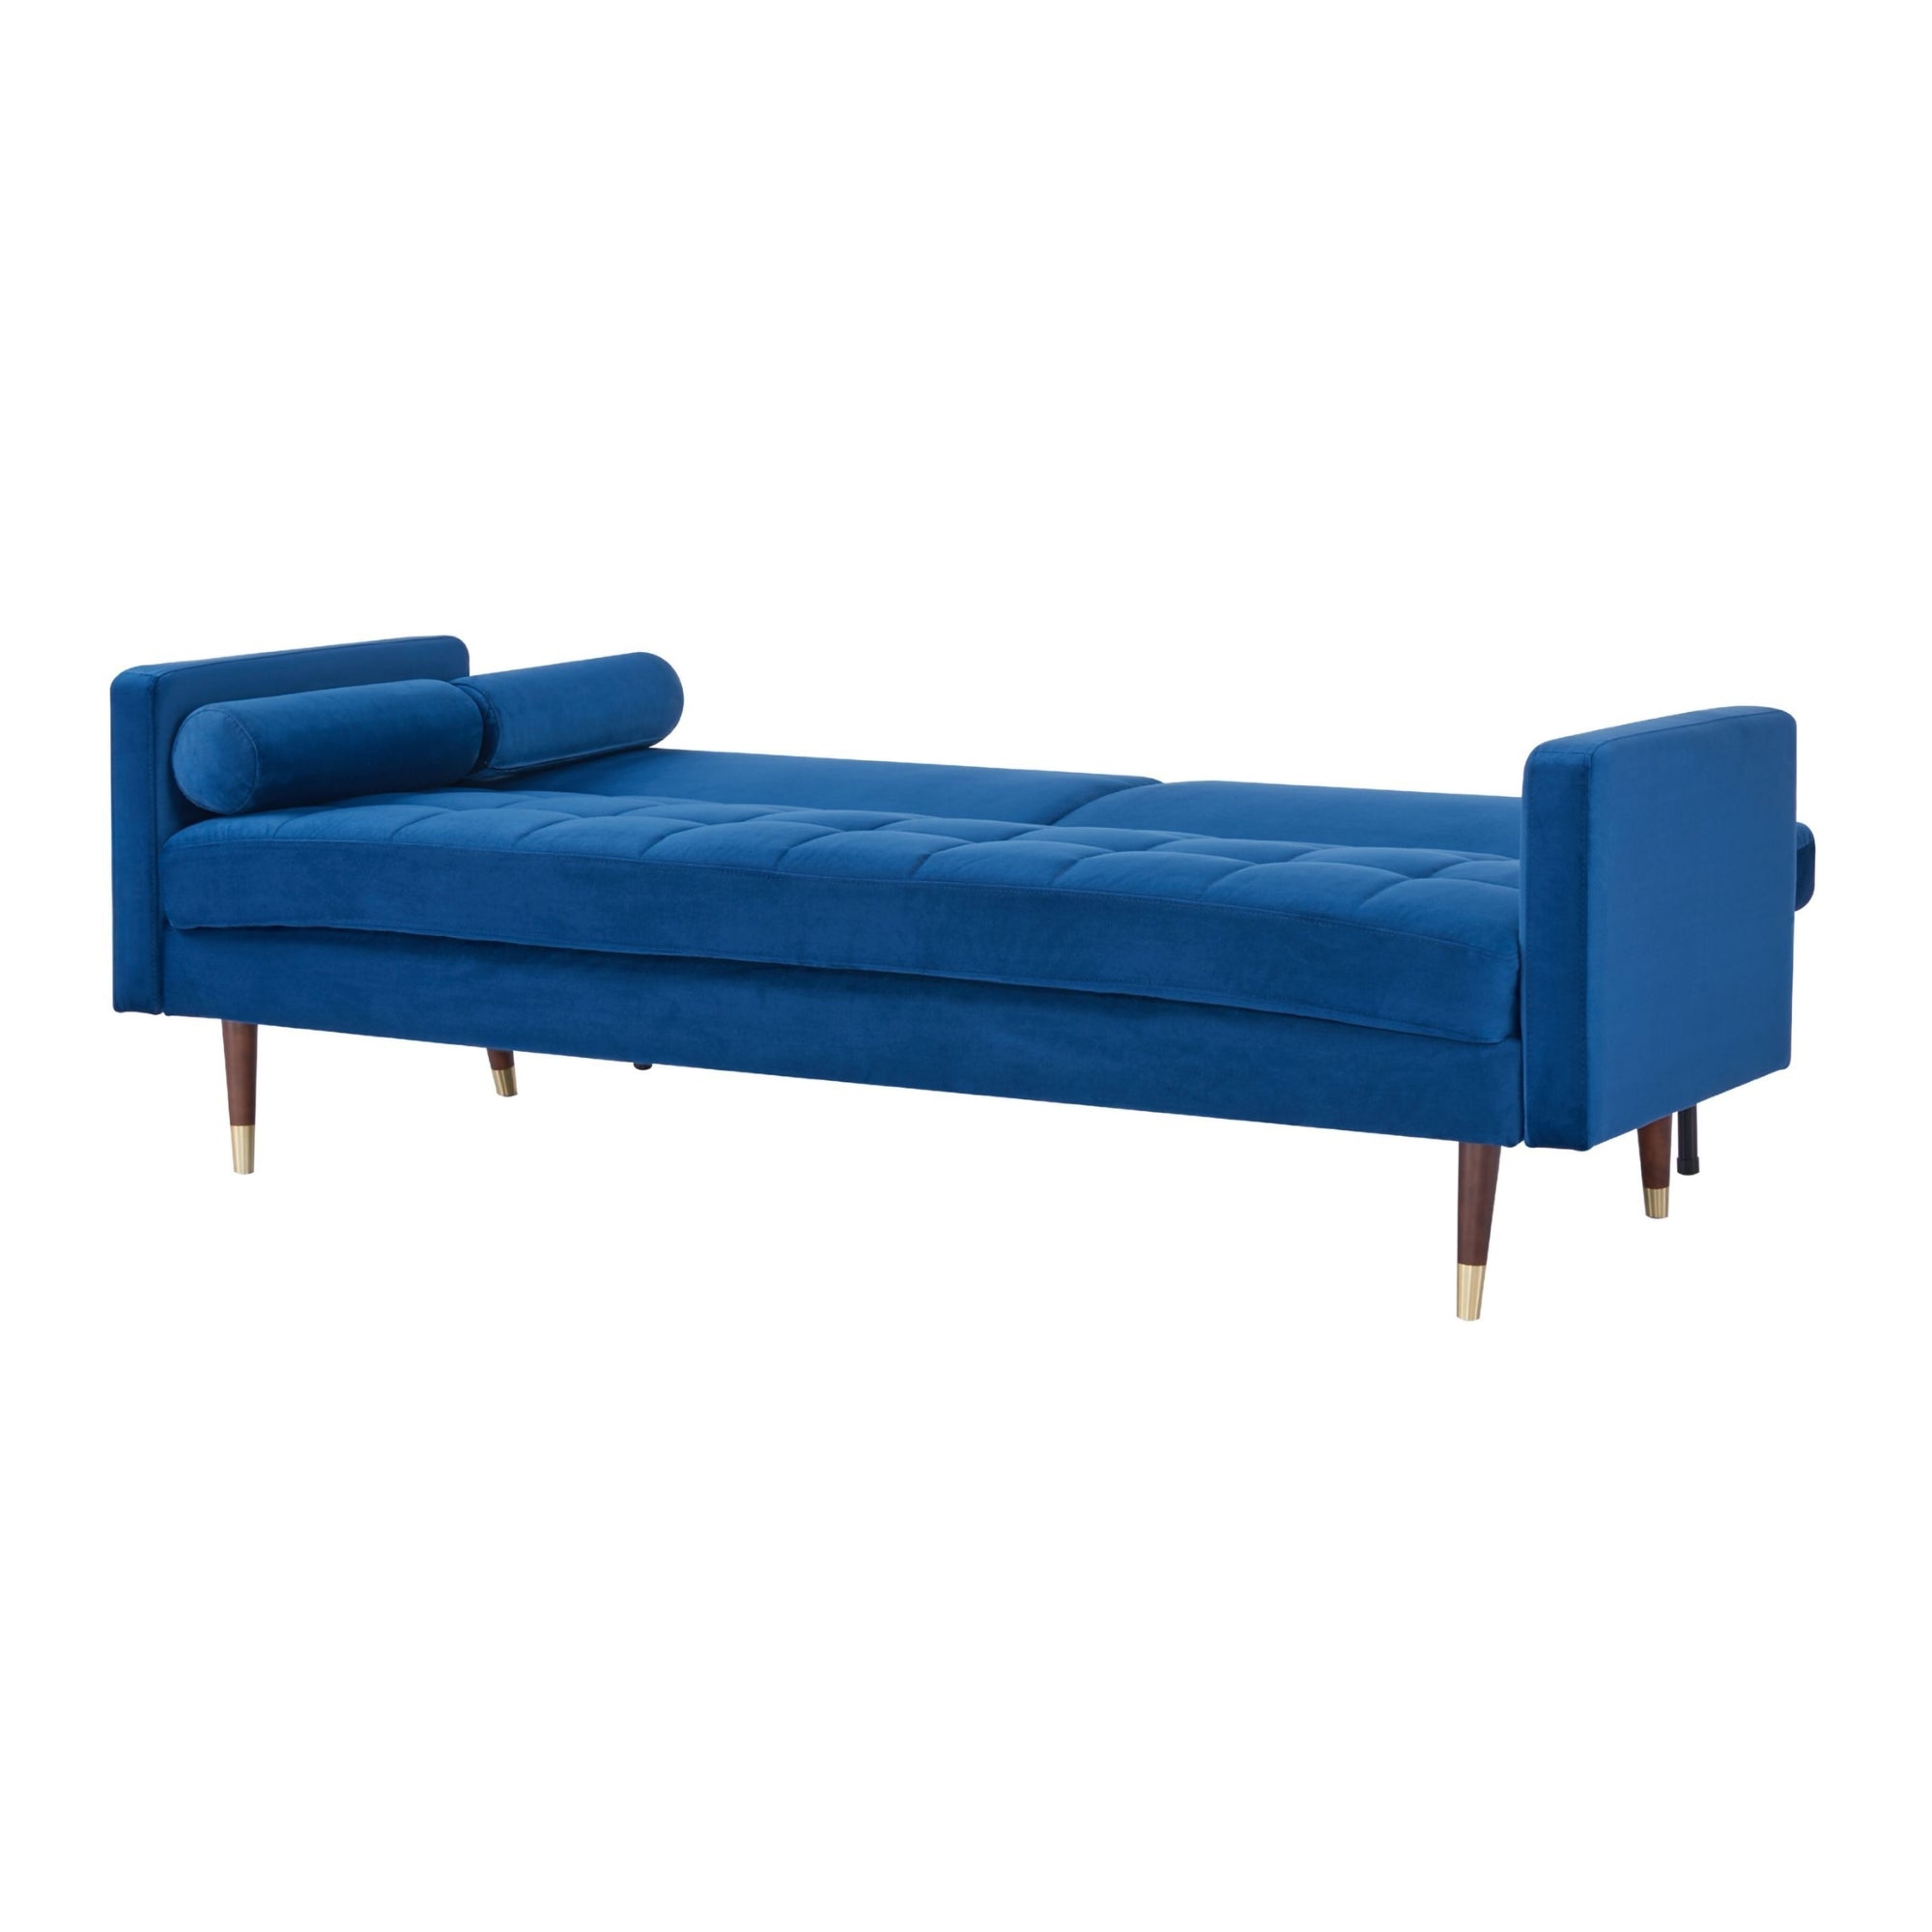 Livia 3 Seater Sofa Bed Fabric Uplholstered Lounge Couch - Dark Blue